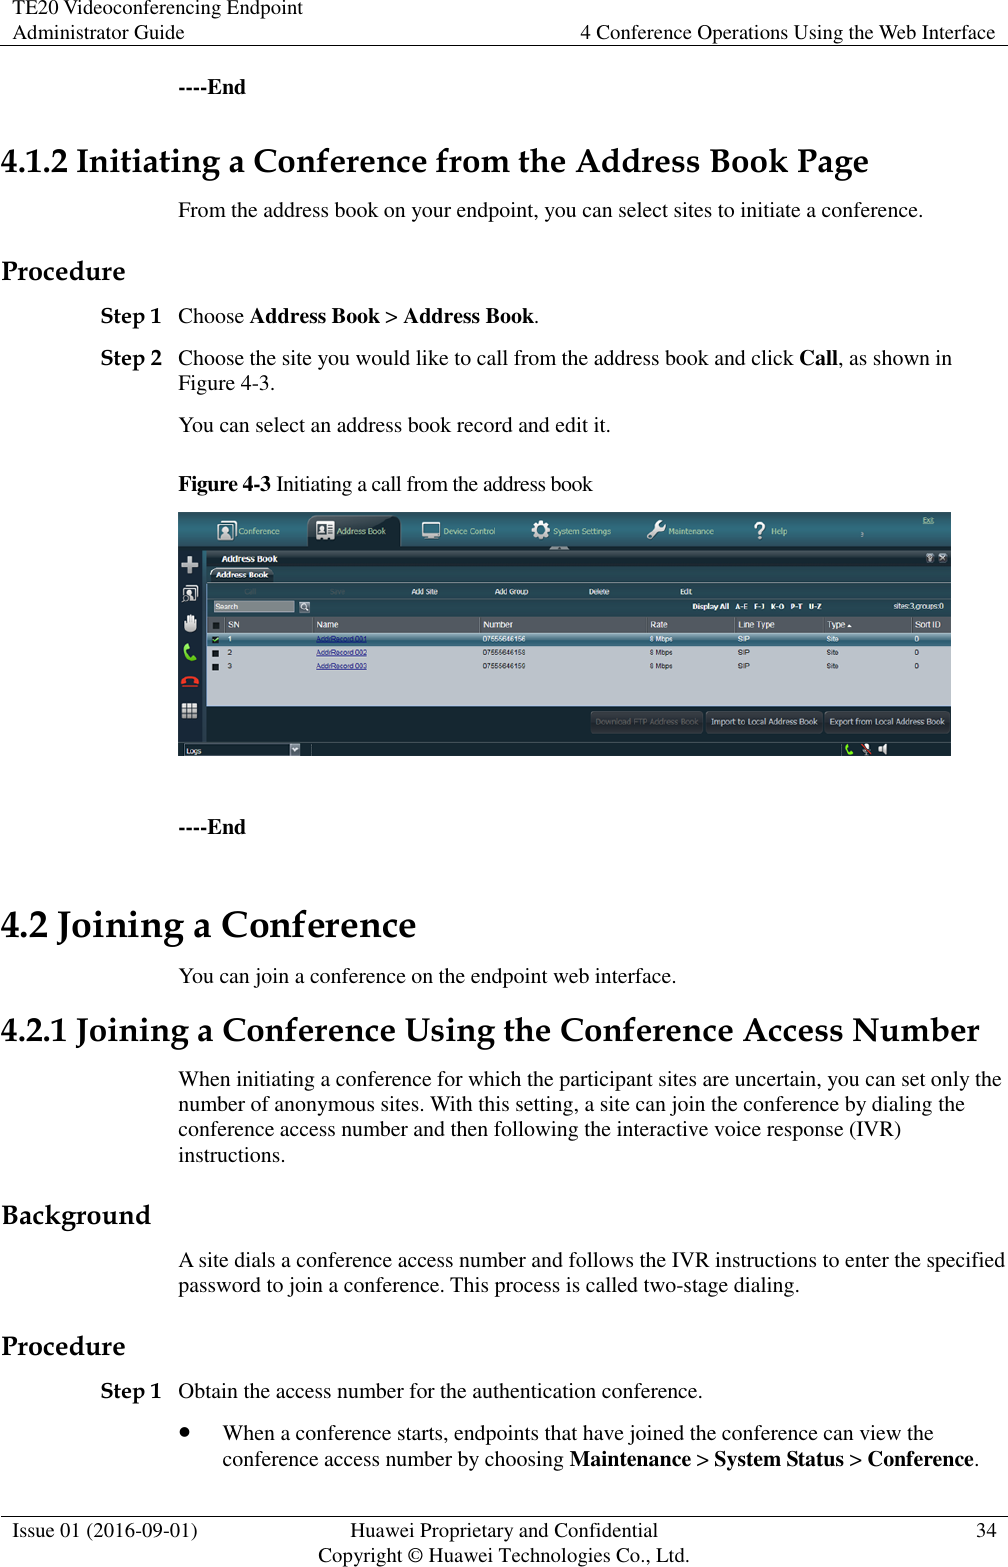 TE20 Videoconferencing Endpoint Administrator Guide 4 Conference Operations Using the Web Interface  Issue 01 (2016-09-01) Huawei Proprietary and Confidential                                     Copyright © Huawei Technologies Co., Ltd. 34  ----End 4.1.2 Initiating a Conference from the Address Book Page From the address book on your endpoint, you can select sites to initiate a conference. Procedure Step 1 Choose Address Book &gt; Address Book. Step 2 Choose the site you would like to call from the address book and click Call, as shown in Figure 4-3. You can select an address book record and edit it. Figure 4-3 Initiating a call from the address book   ----End 4.2 Joining a Conference You can join a conference on the endpoint web interface. 4.2.1 Joining a Conference Using the Conference Access Number When initiating a conference for which the participant sites are uncertain, you can set only the number of anonymous sites. With this setting, a site can join the conference by dialing the conference access number and then following the interactive voice response (IVR) instructions. Background A site dials a conference access number and follows the IVR instructions to enter the specified password to join a conference. This process is called two-stage dialing. Procedure Step 1 Obtain the access number for the authentication conference.  When a conference starts, endpoints that have joined the conference can view the conference access number by choosing Maintenance &gt; System Status &gt; Conference. 